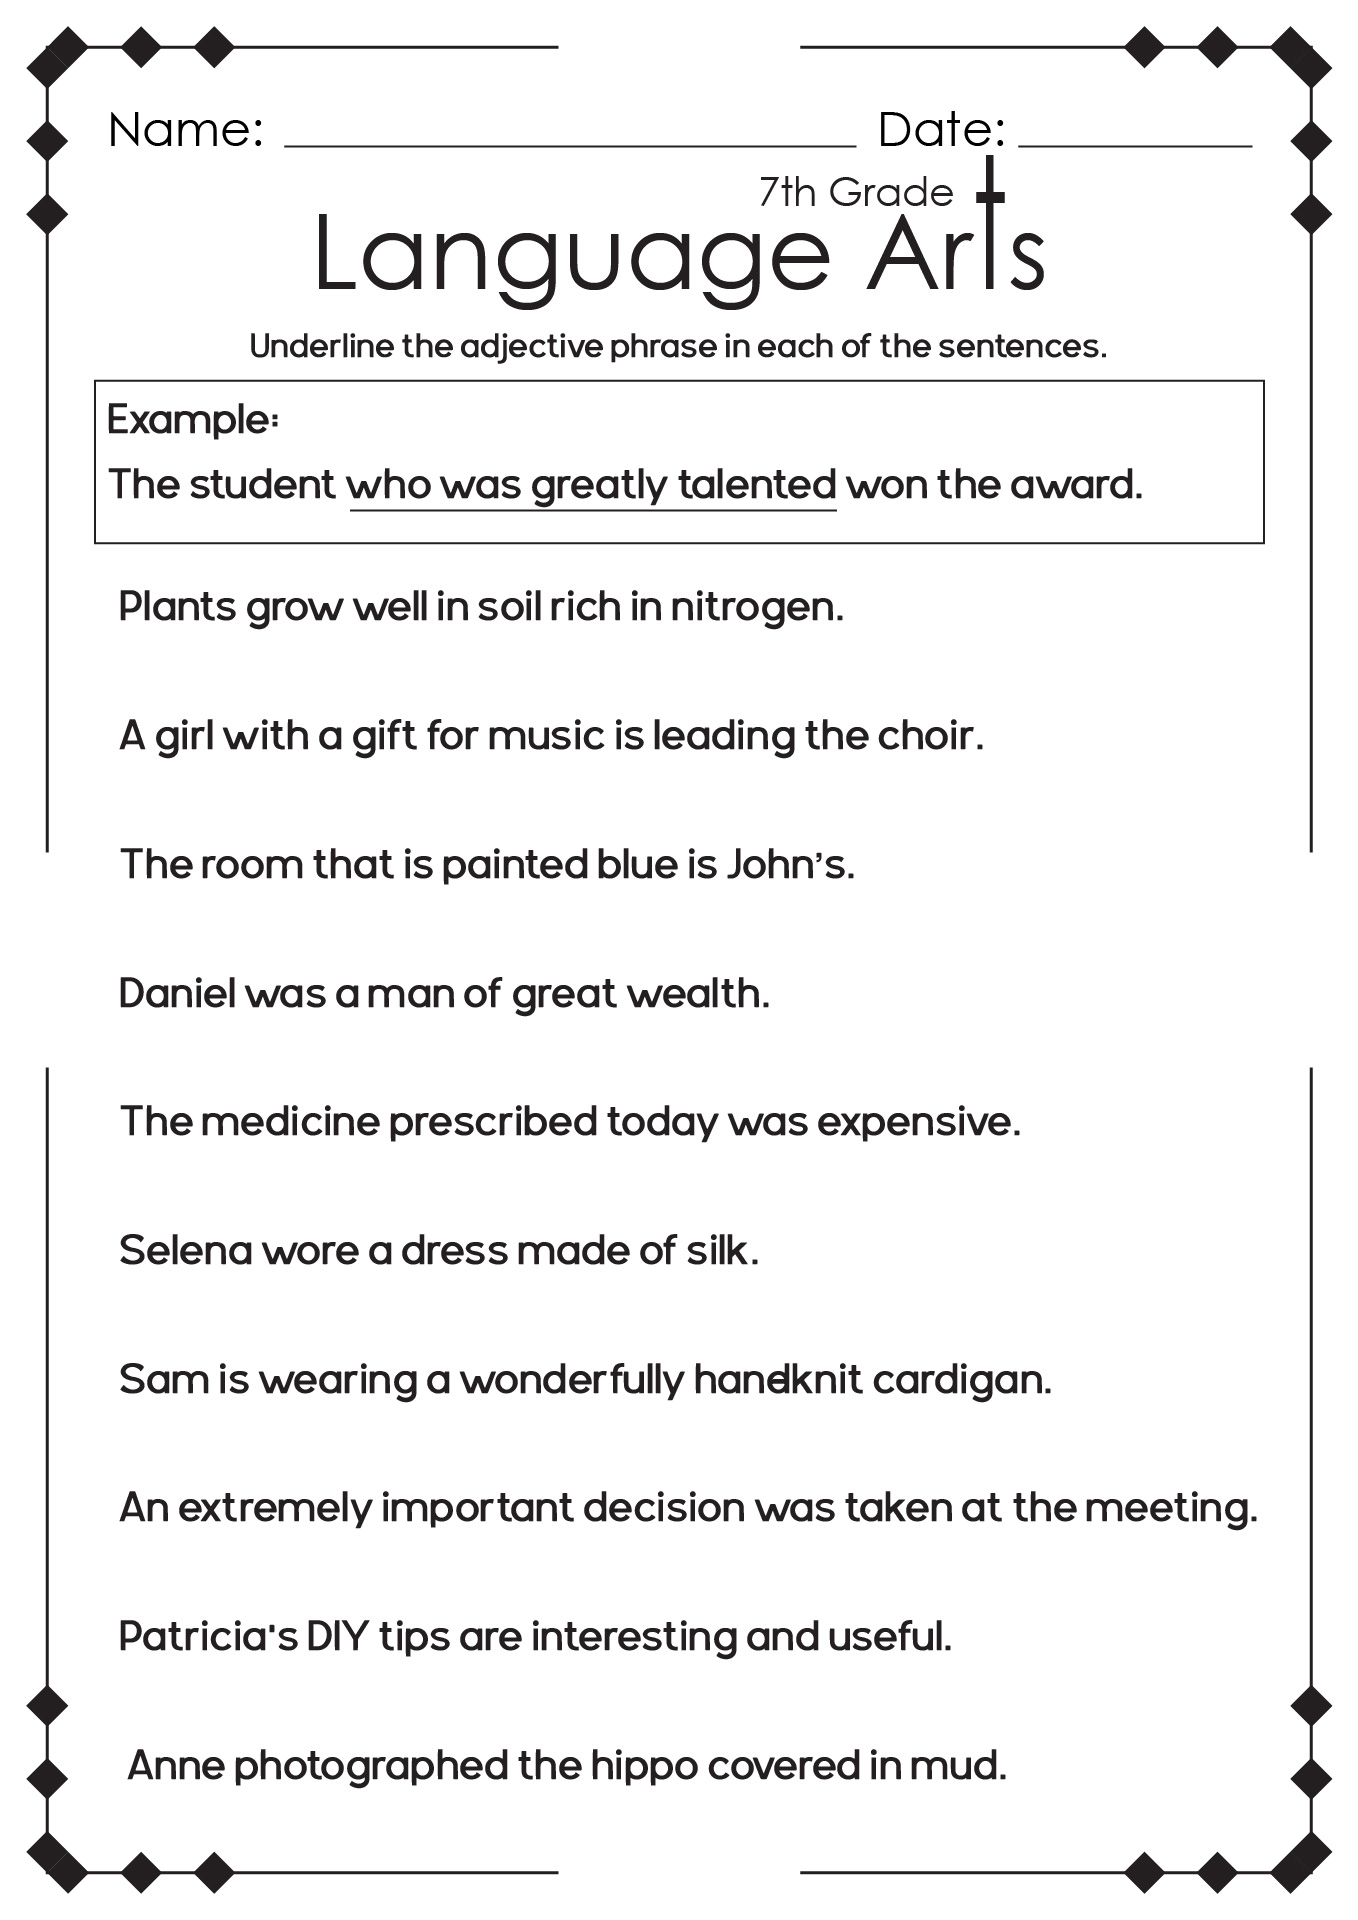 13-best-images-of-high-school-english-language-arts-worksheets-high